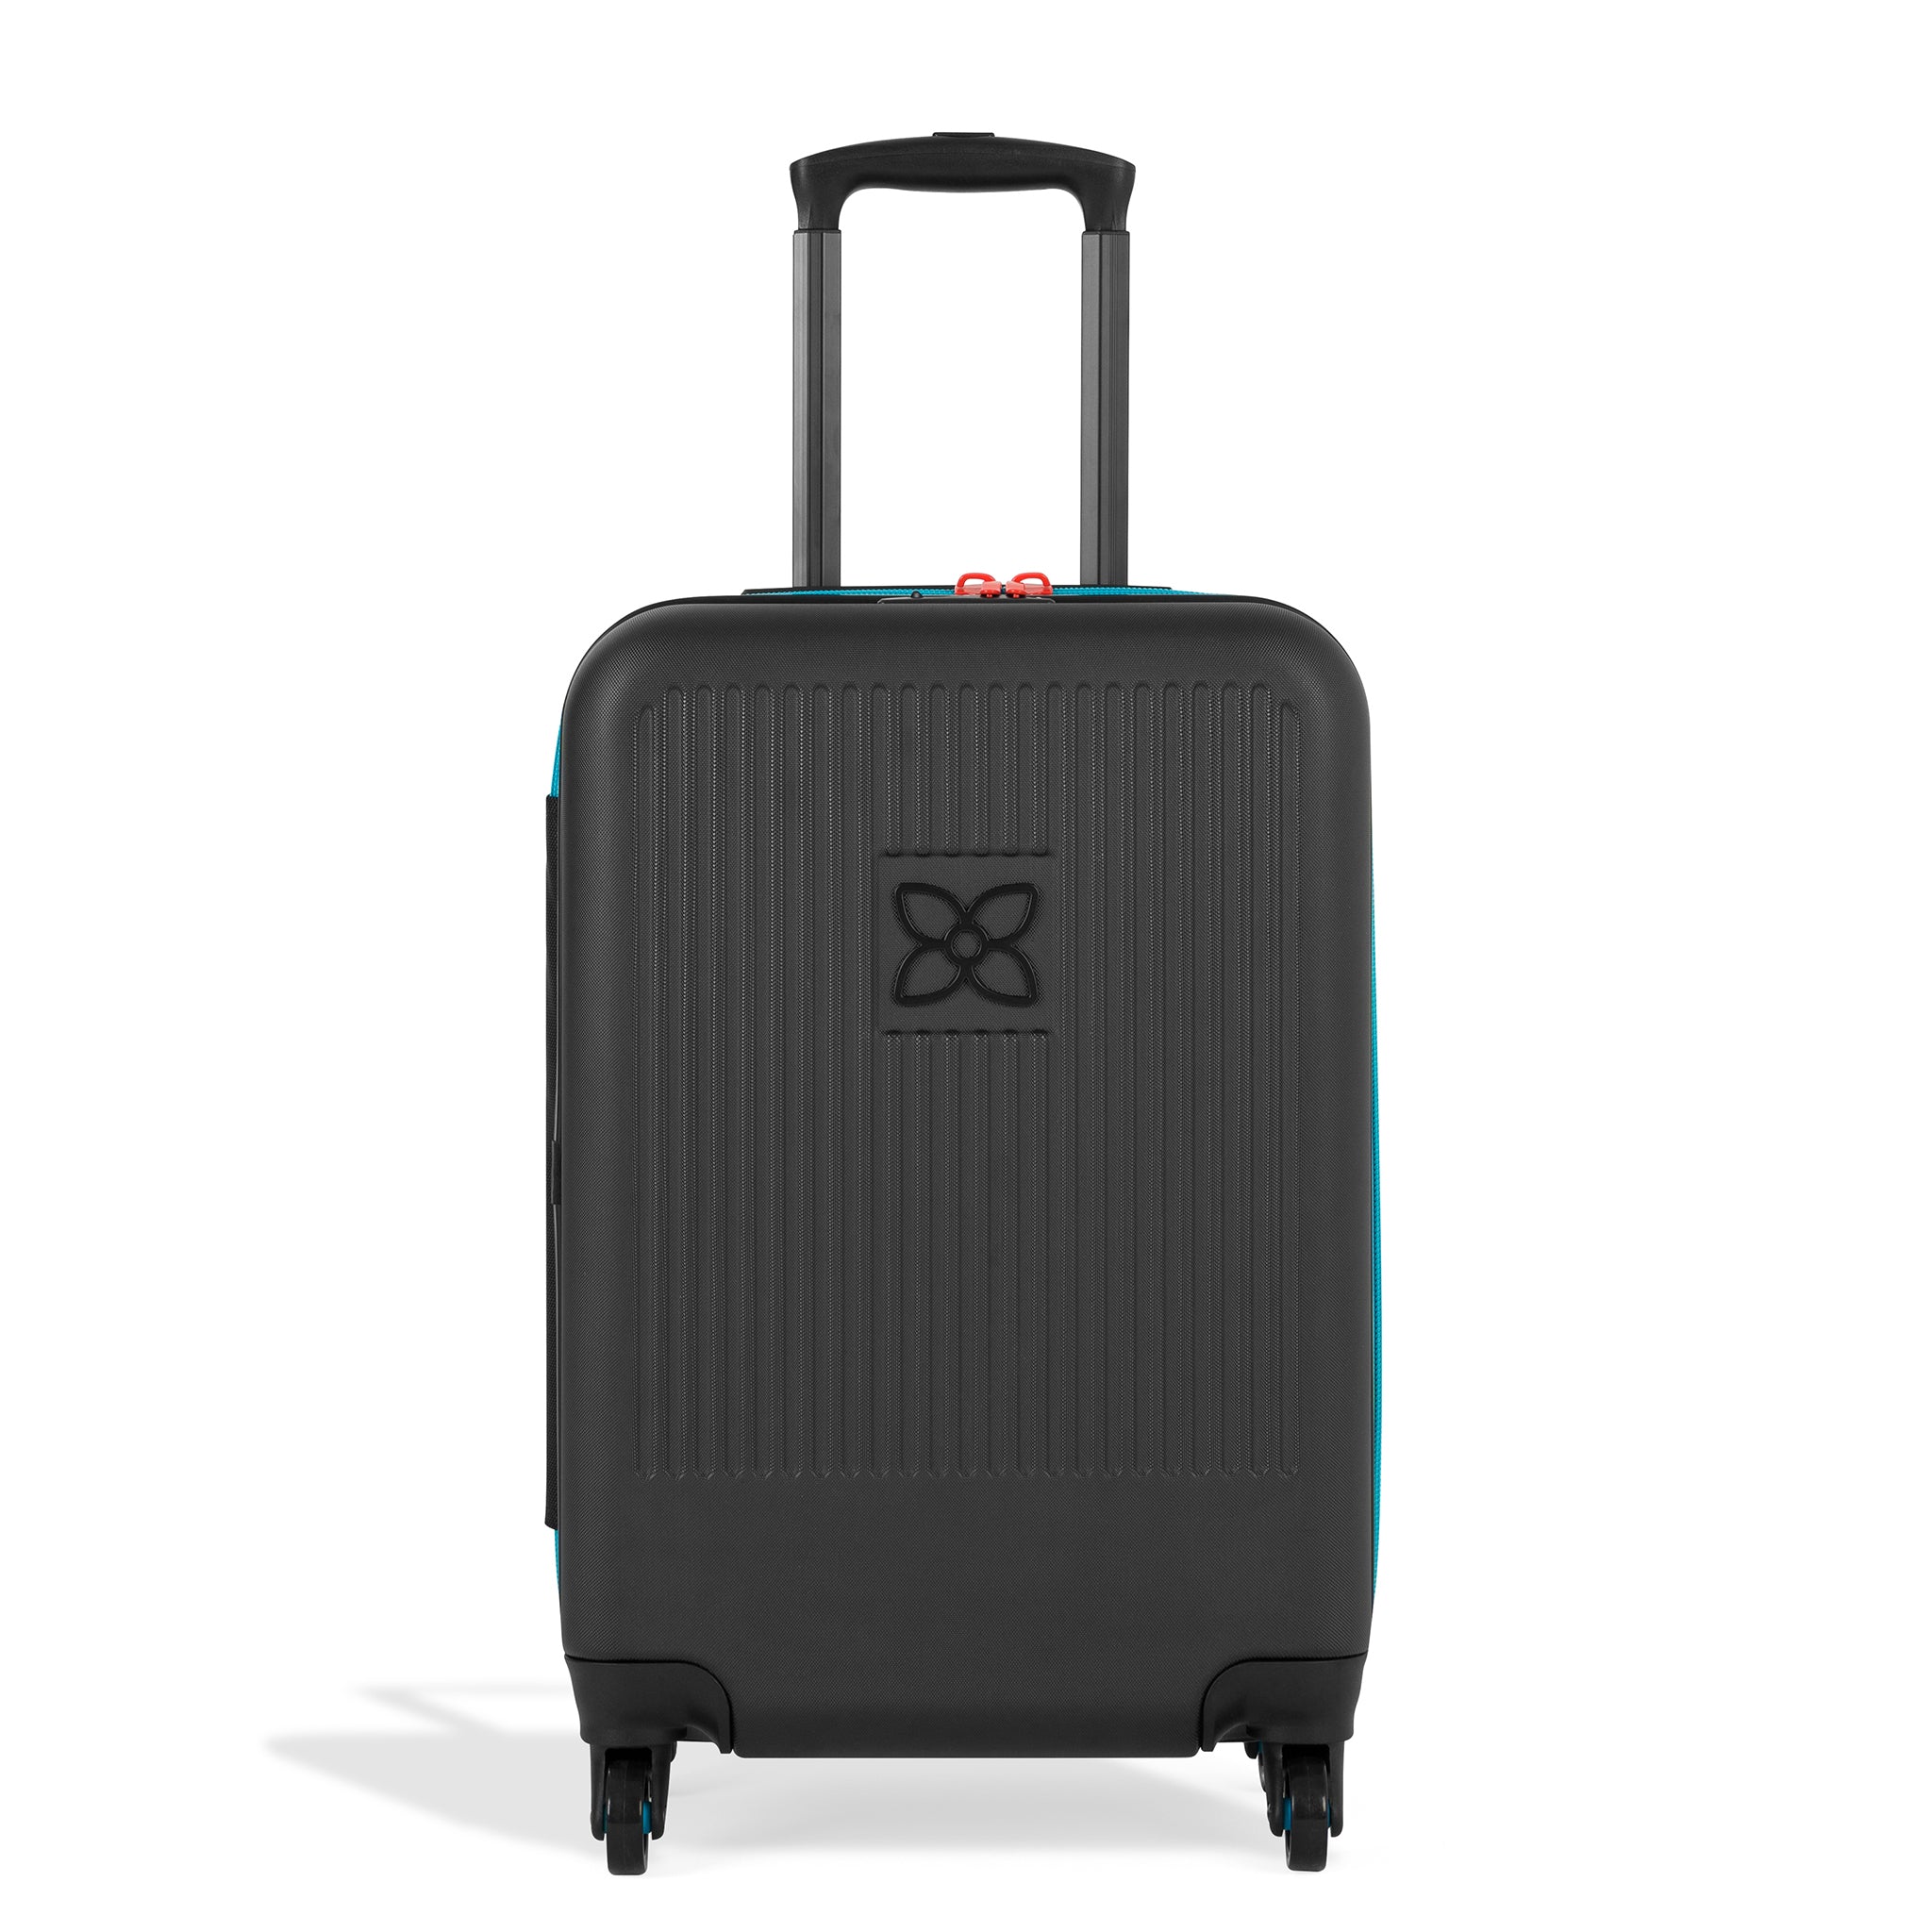 Sherpani hard shell luggage the Meridian. Part of Sherpani Travel Carry on Bundle in Cool Chromatic. 